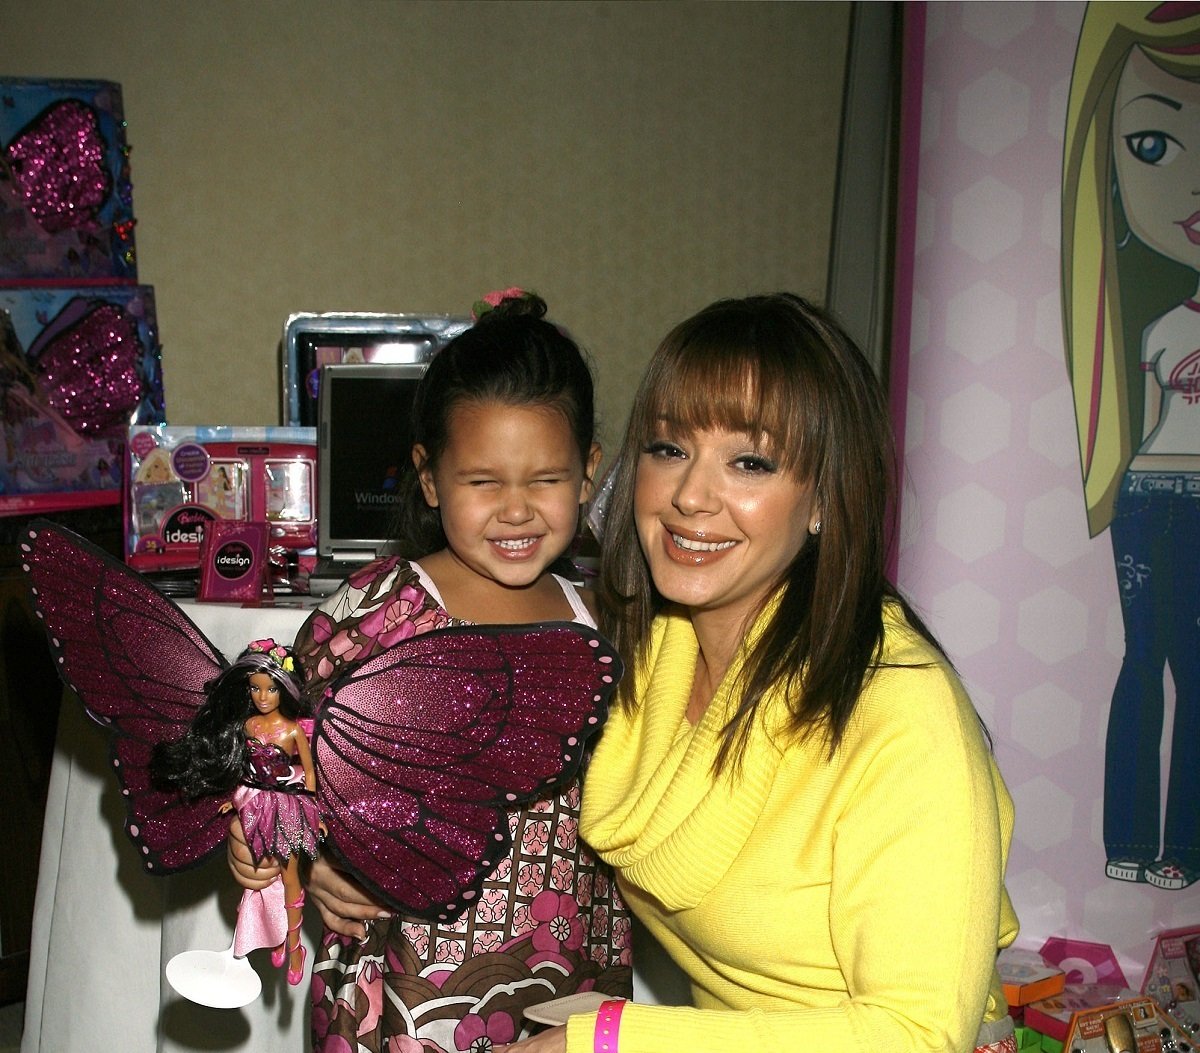 Leah Remini with her daughter, Sofia Bella Pagan, attends the Boom Boom Room Gifting Wonderland in 2008